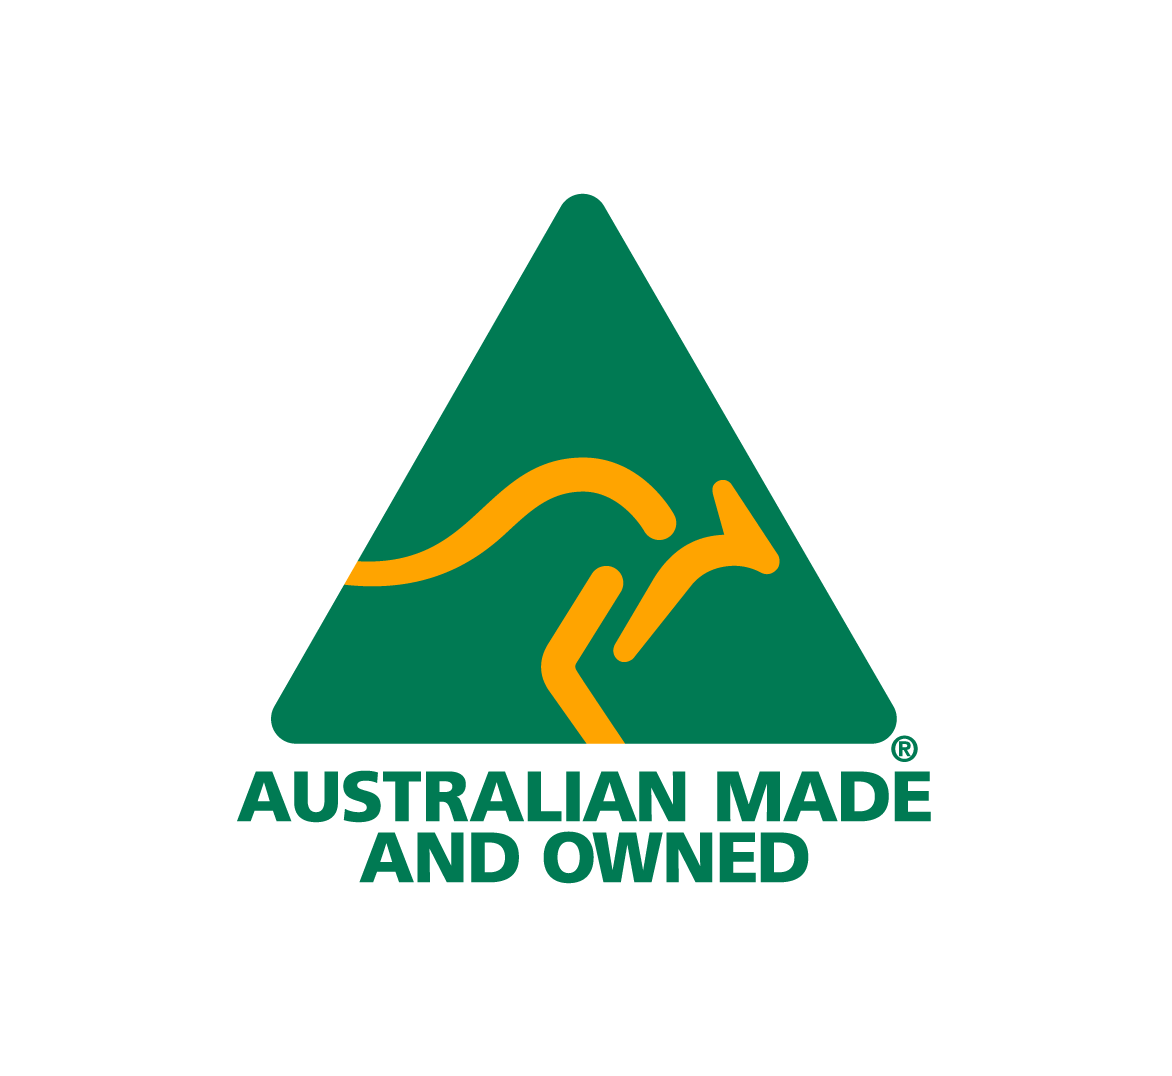 Australia-made-and-owned-logo